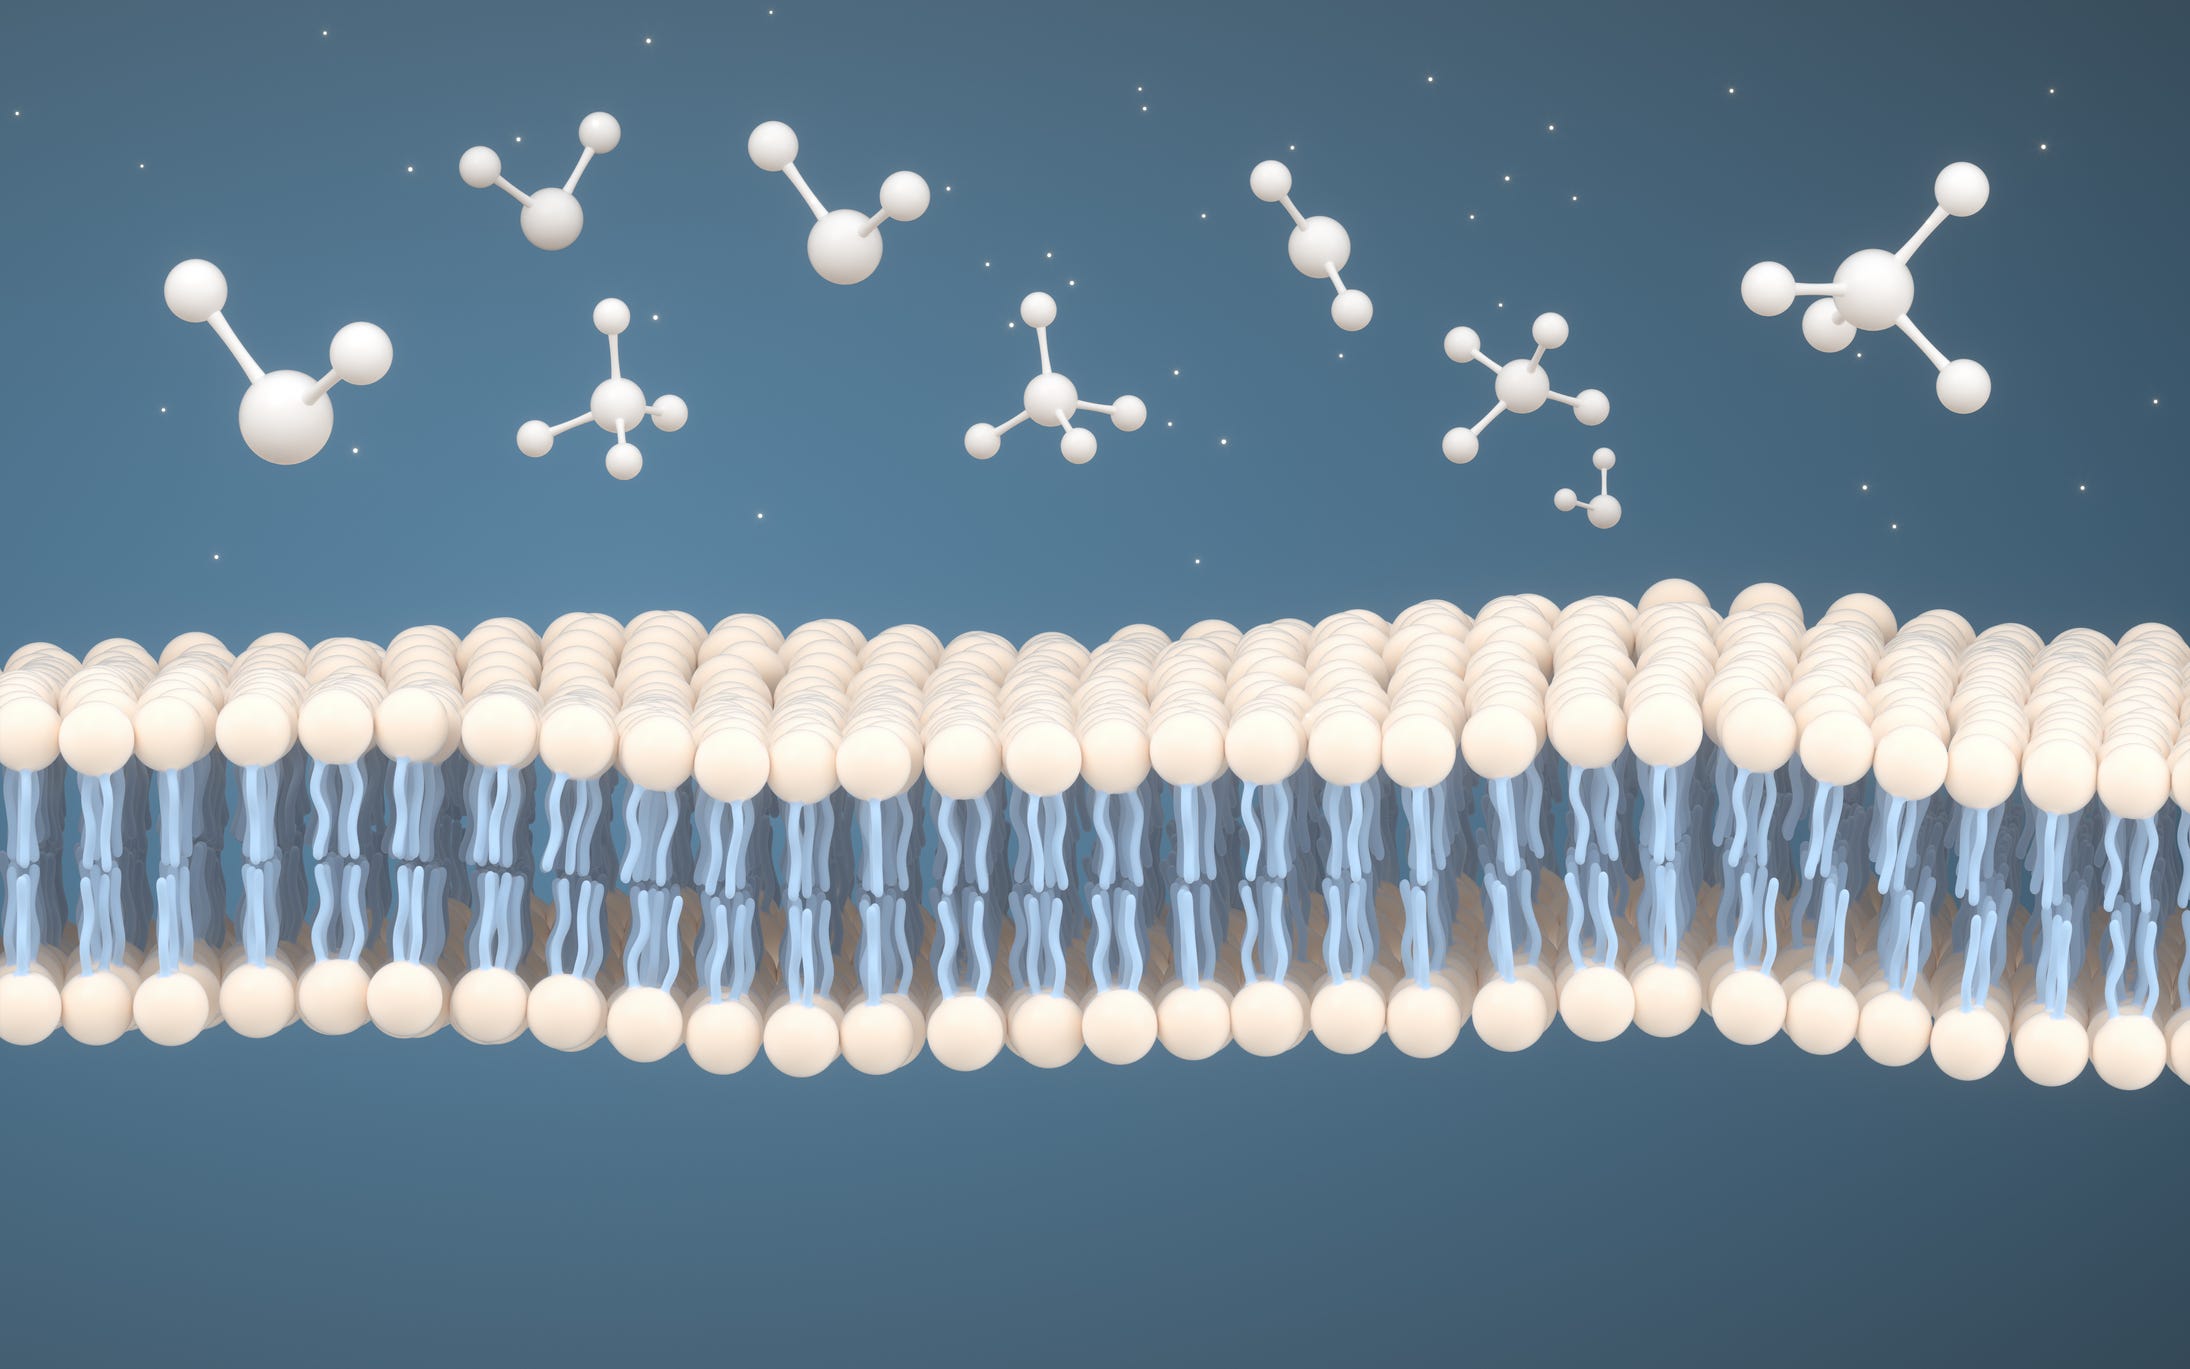 Illustration of cell membranes